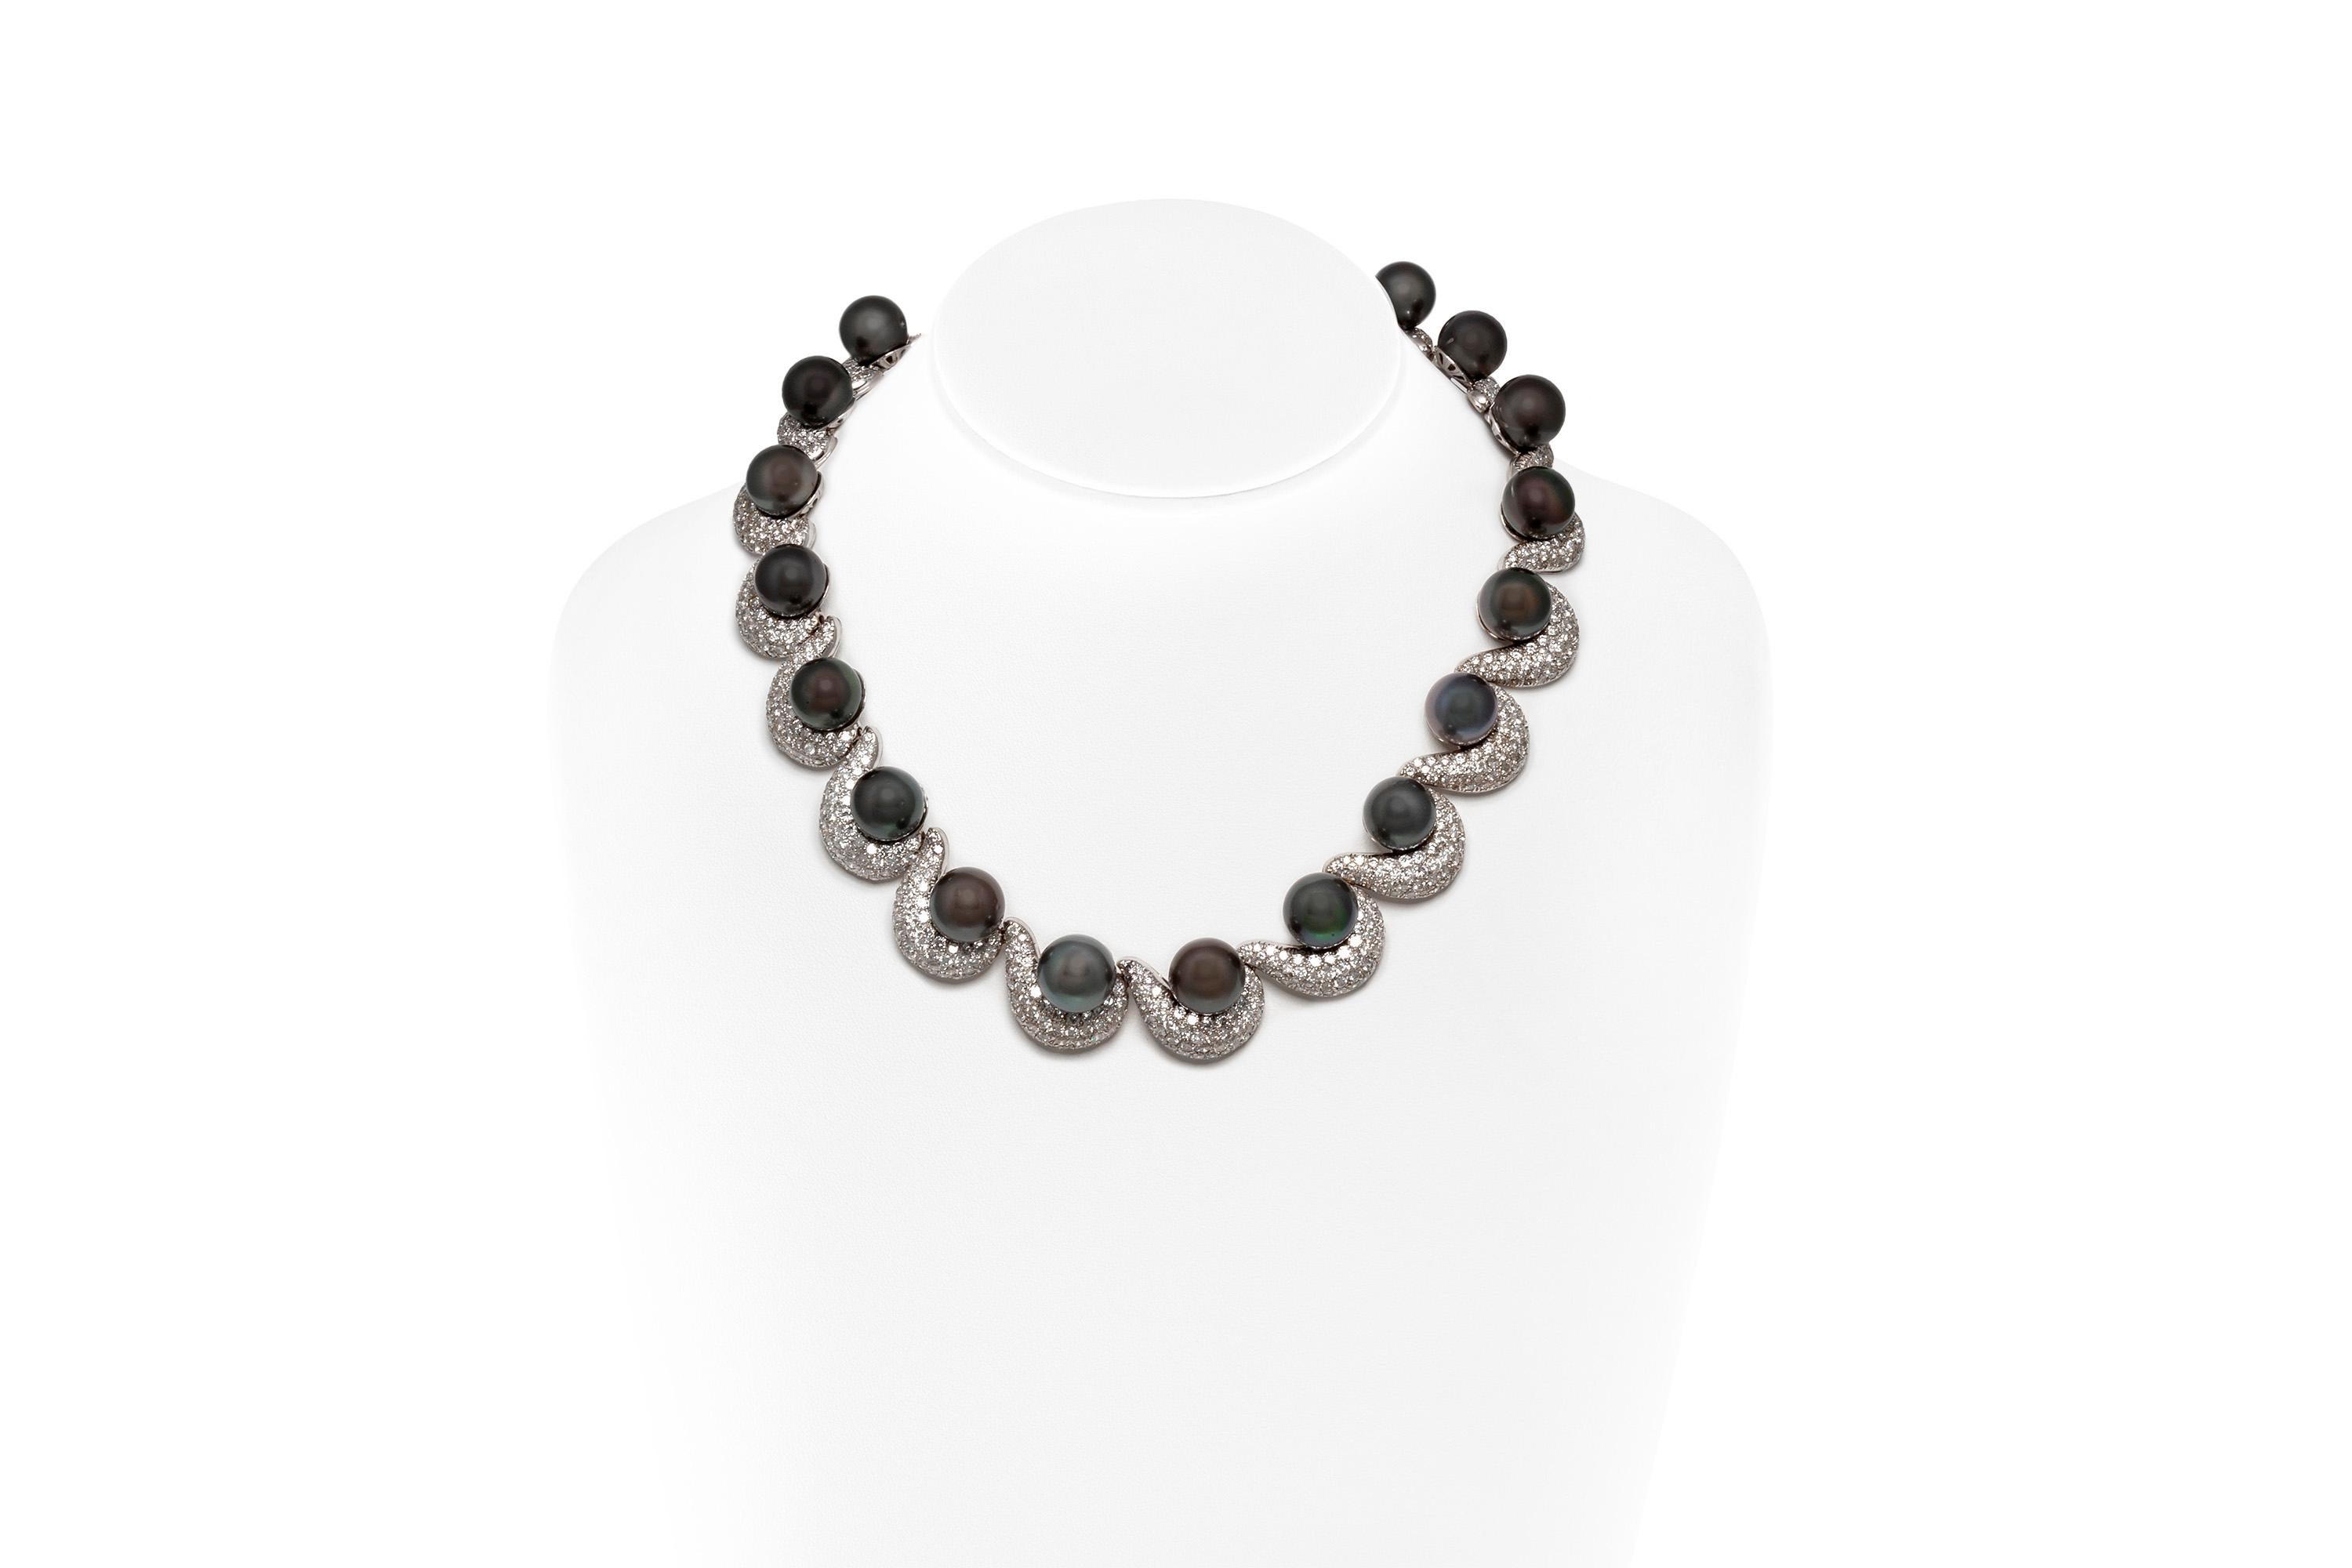 Necklace, finely crafted in 18k white gold with diamonds weighing approximately a total of 50.00 carats and black pearls.

